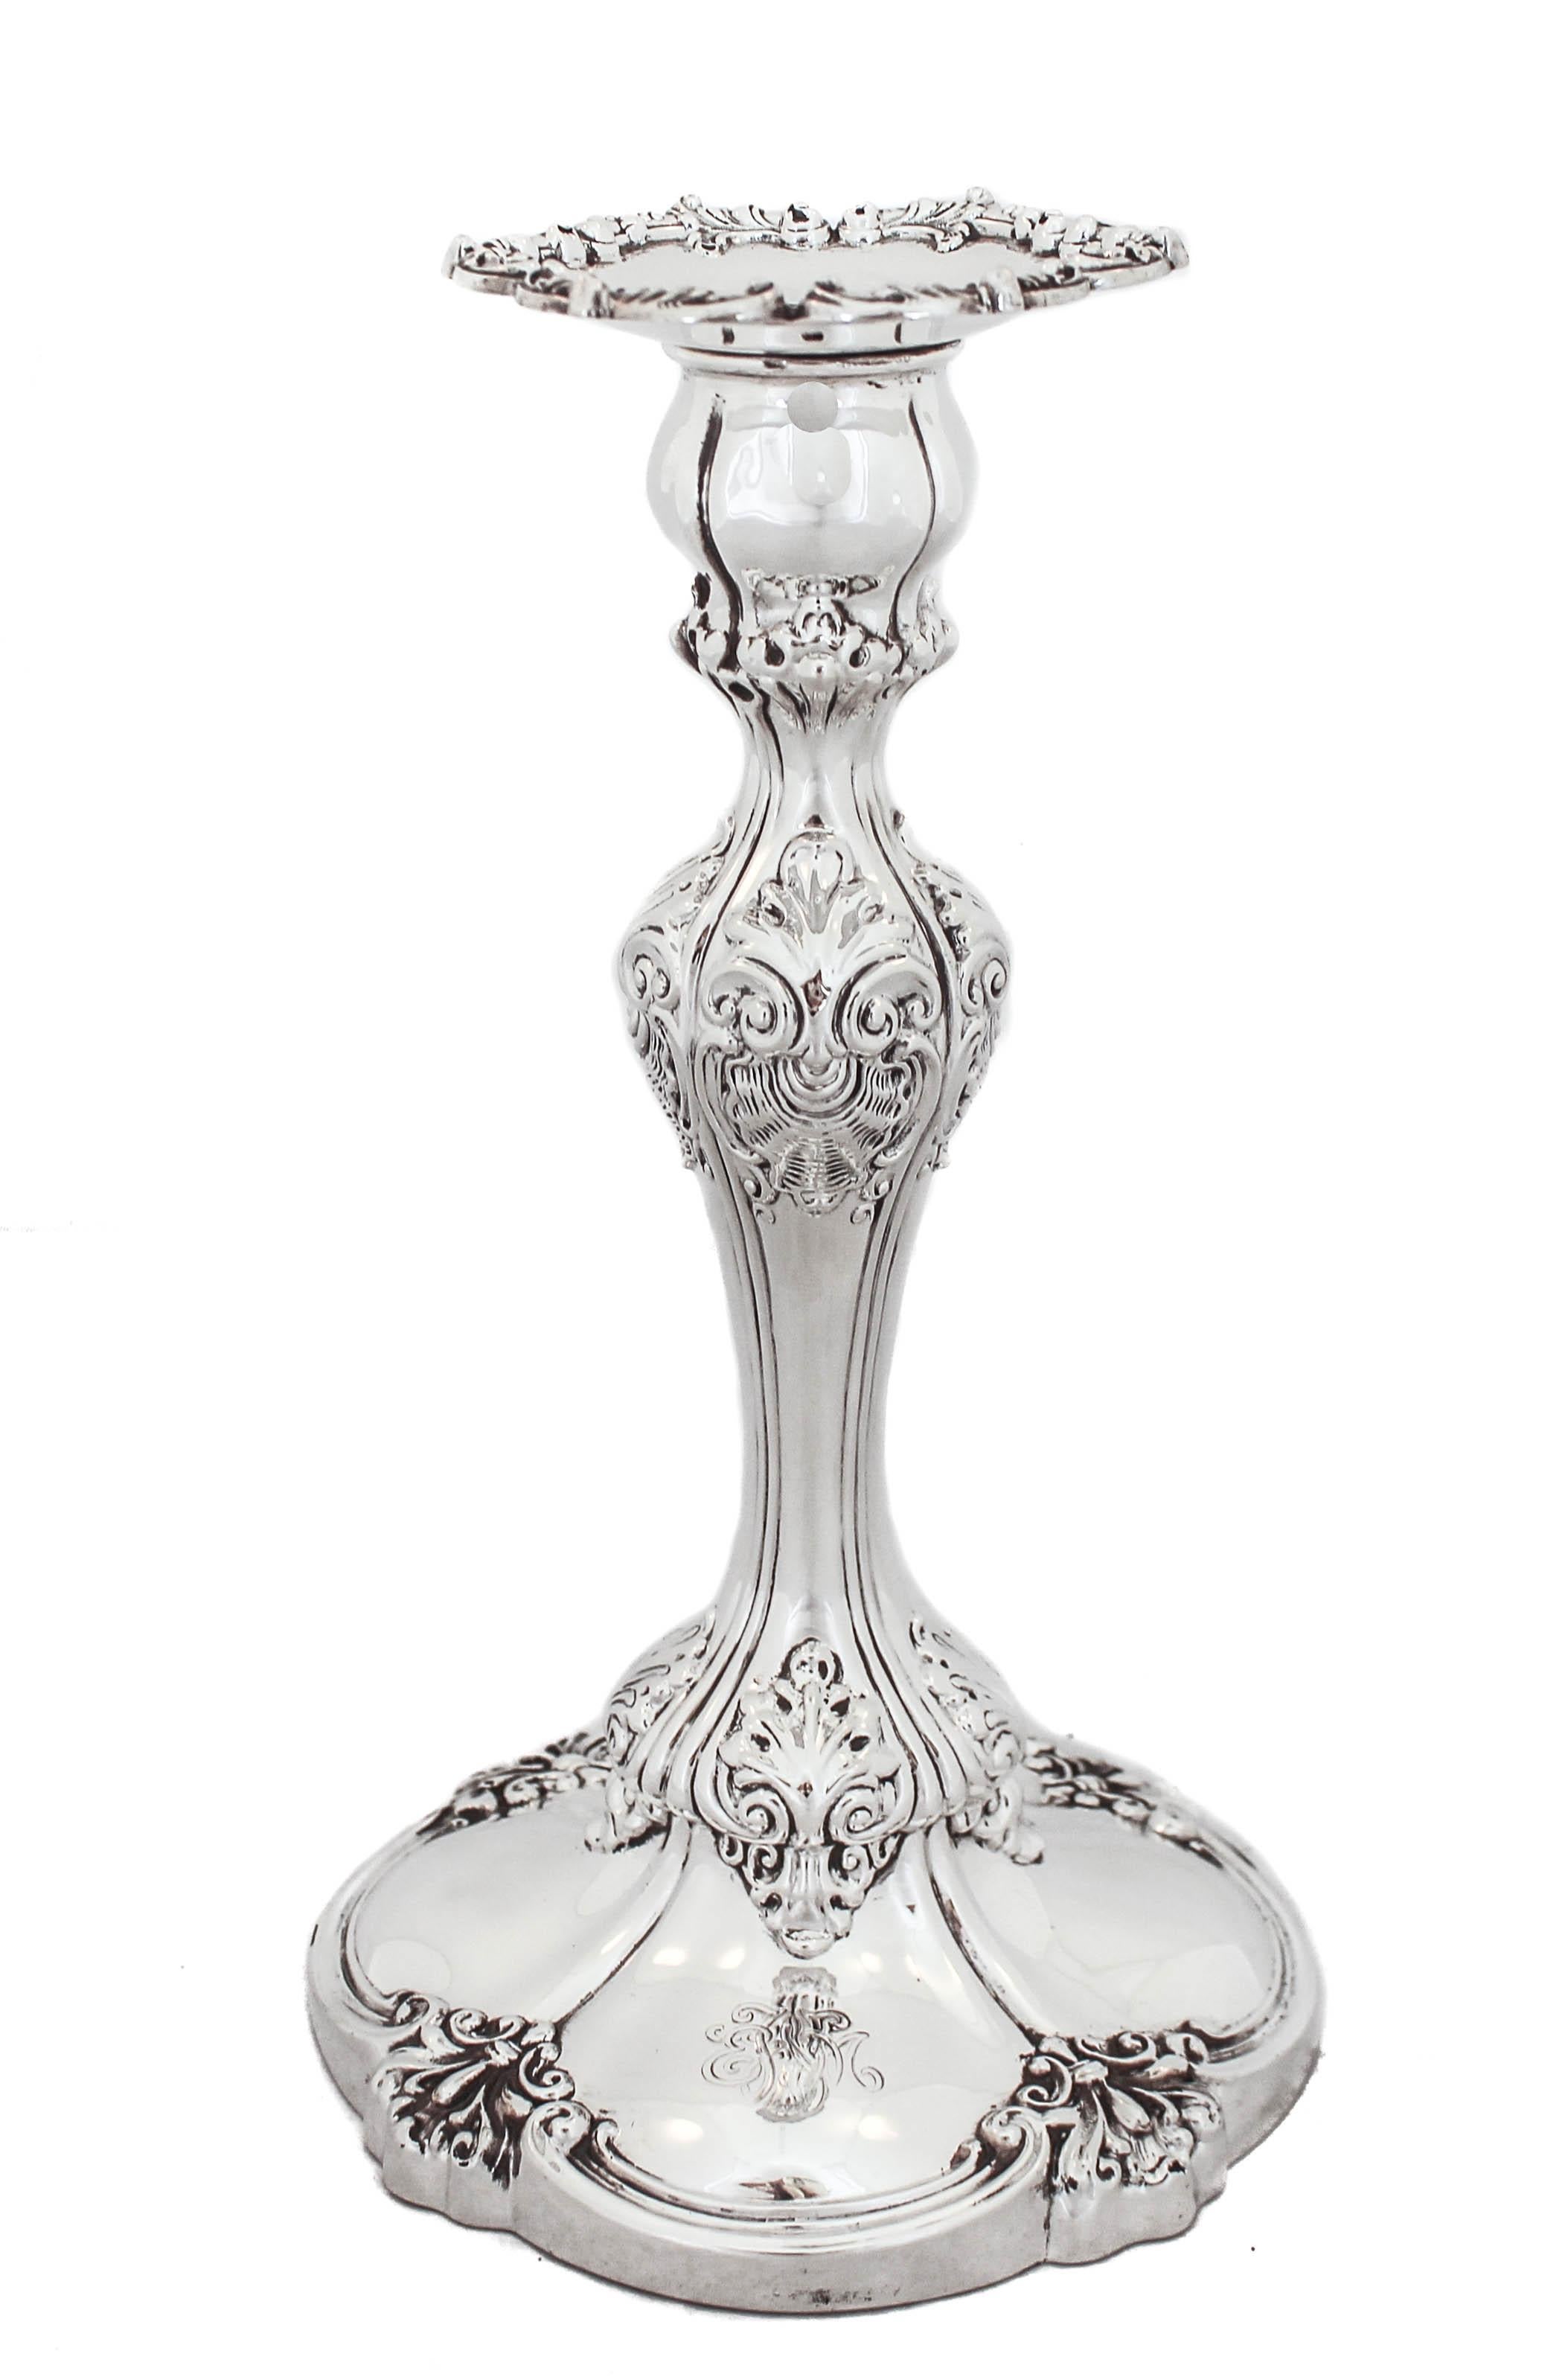 Being offered is a pair of sterling silver candlesticks by the world renowned Tiffany and Company.  They have a rich old-world design and are very prominent.  The base is scalloped and has four ornamental indentations.  That same work is found